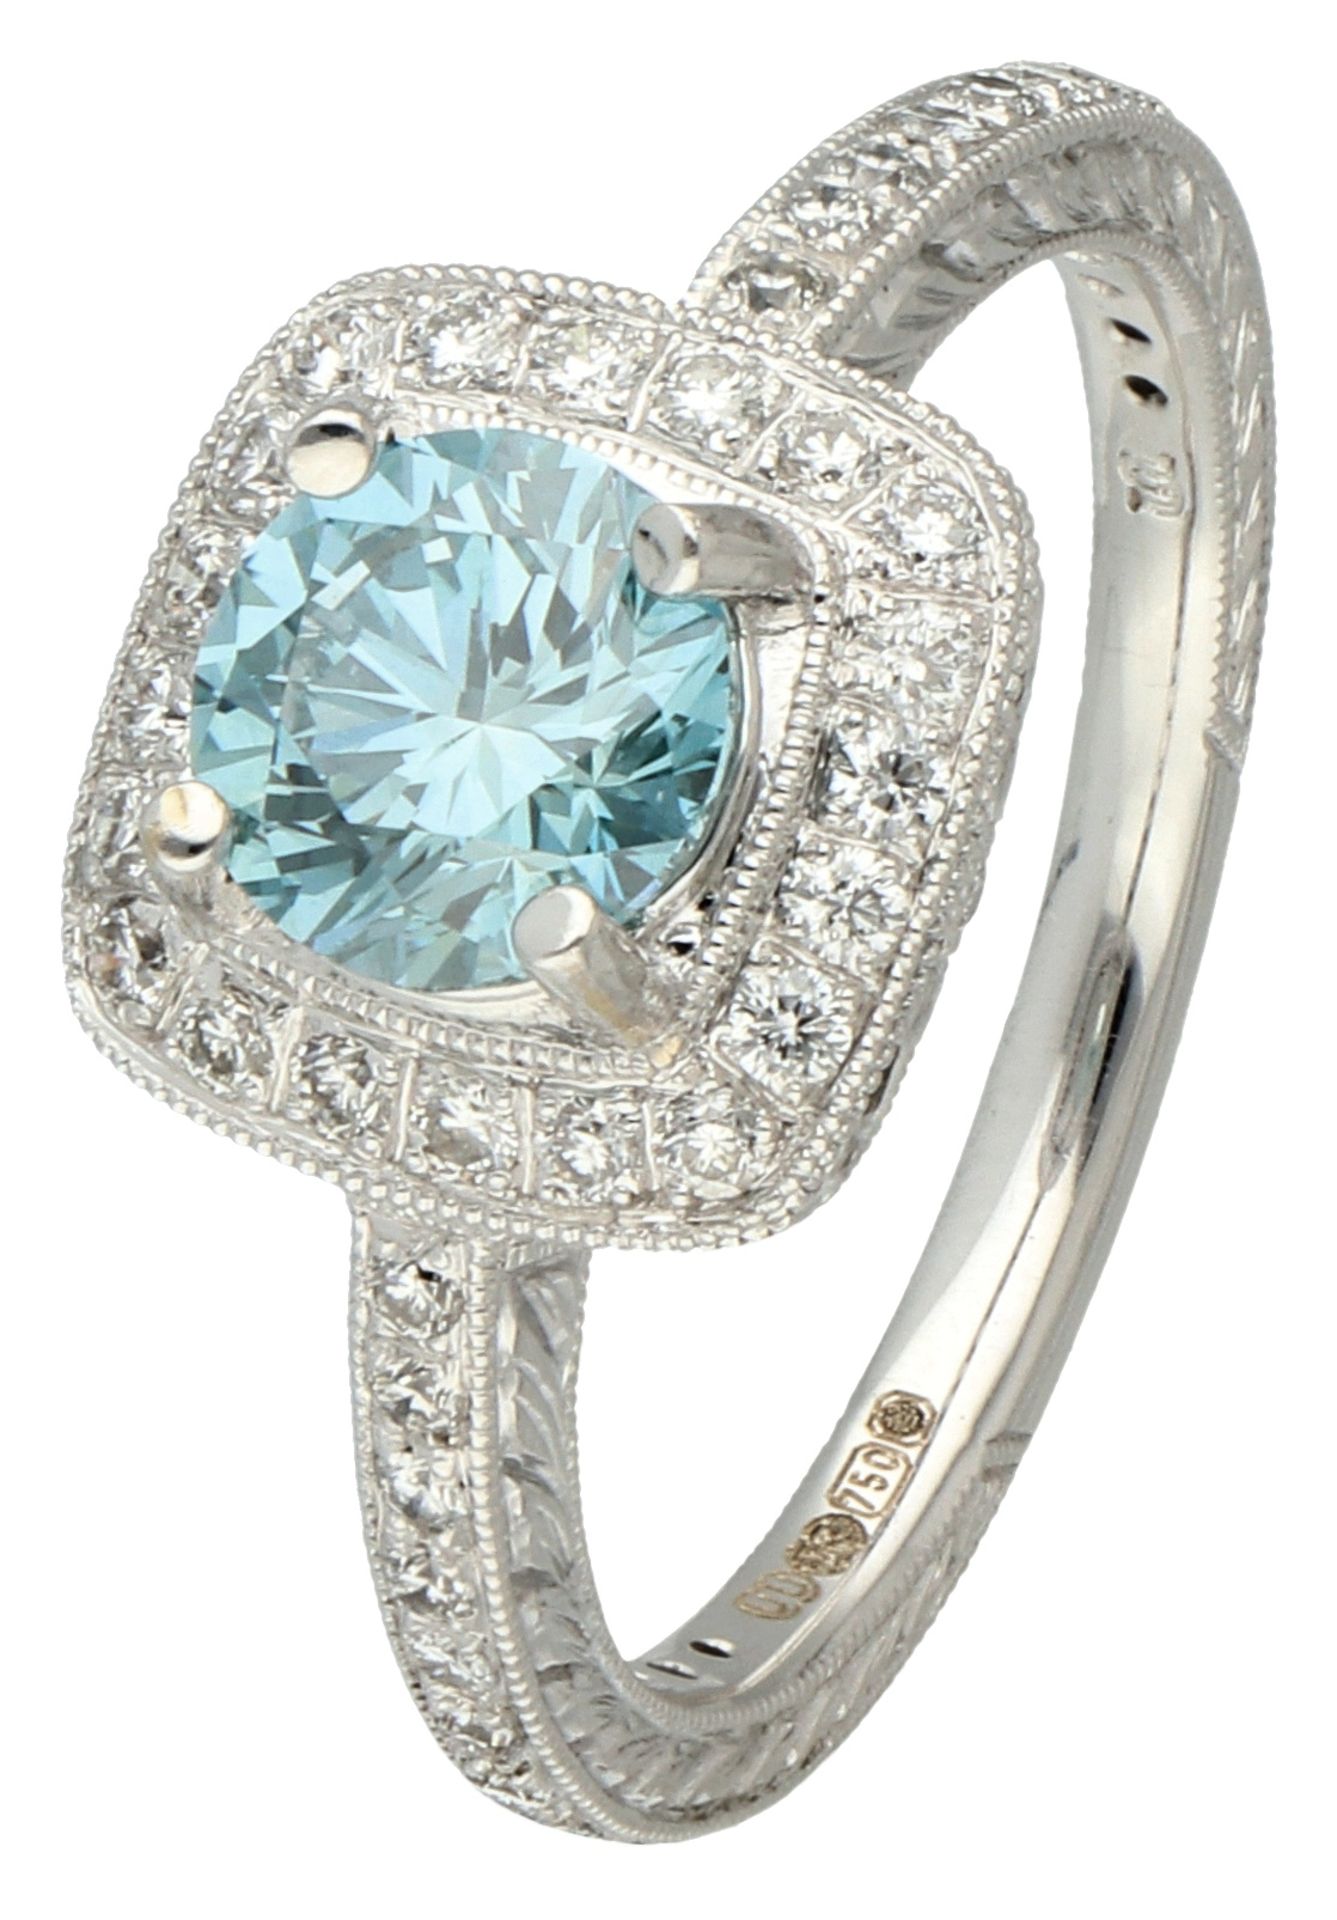 18K White gold shoulder ring set with approx. 0.97 ct. blue diamond and engraved details.